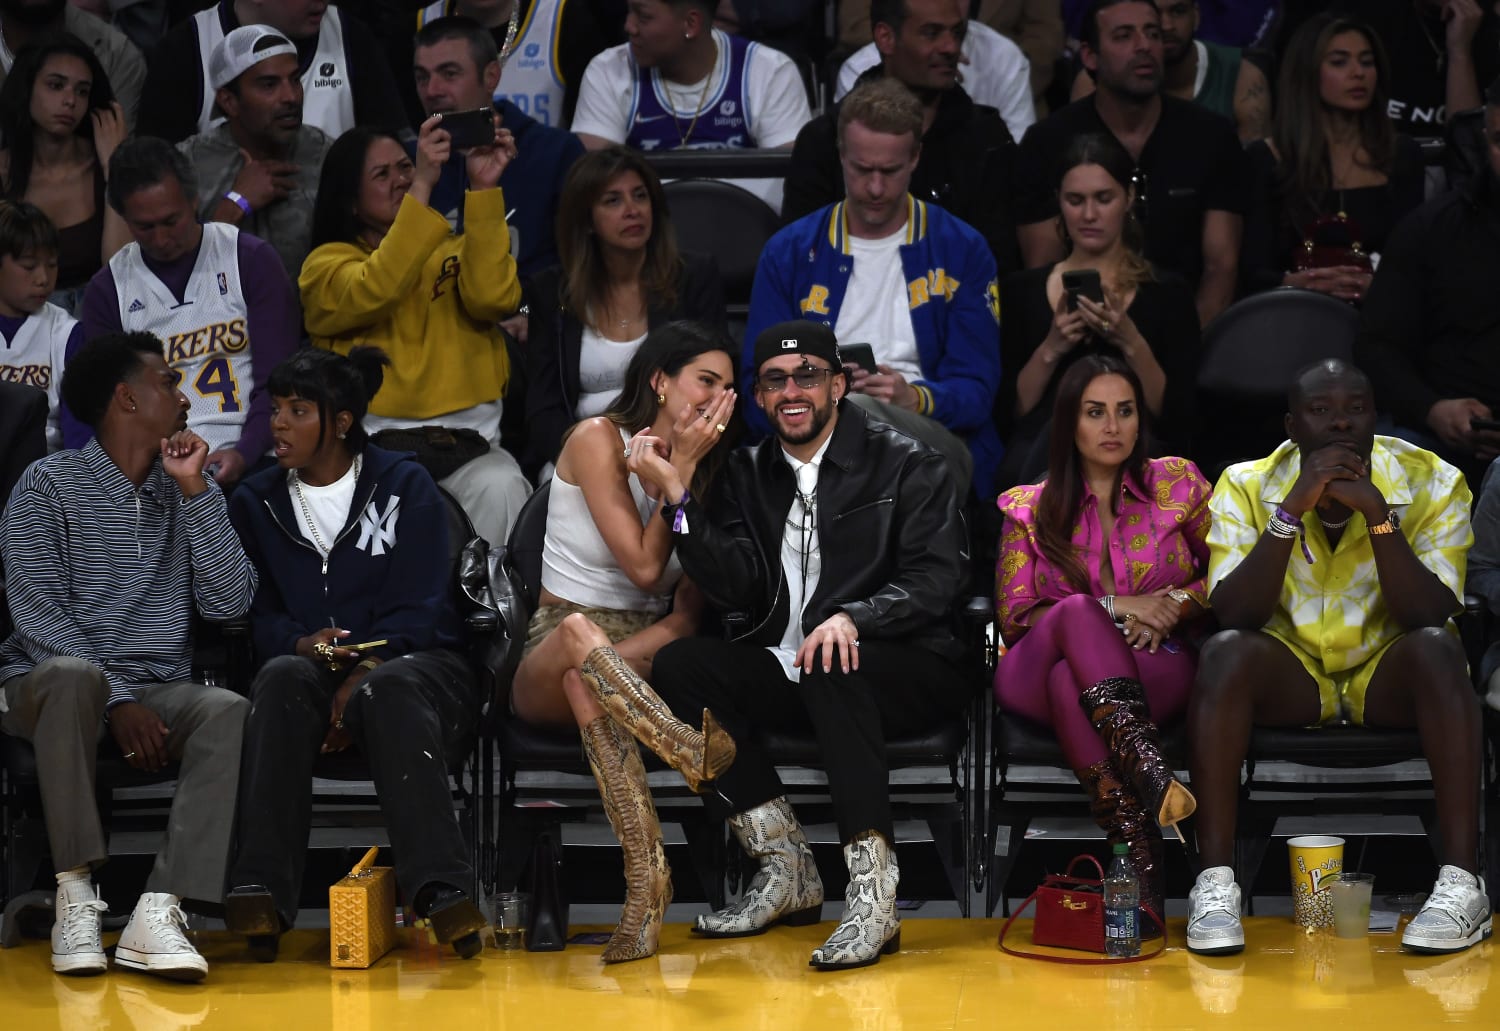 Bad Bunny and Kendall Jenner coordinate shoes at Lakers game